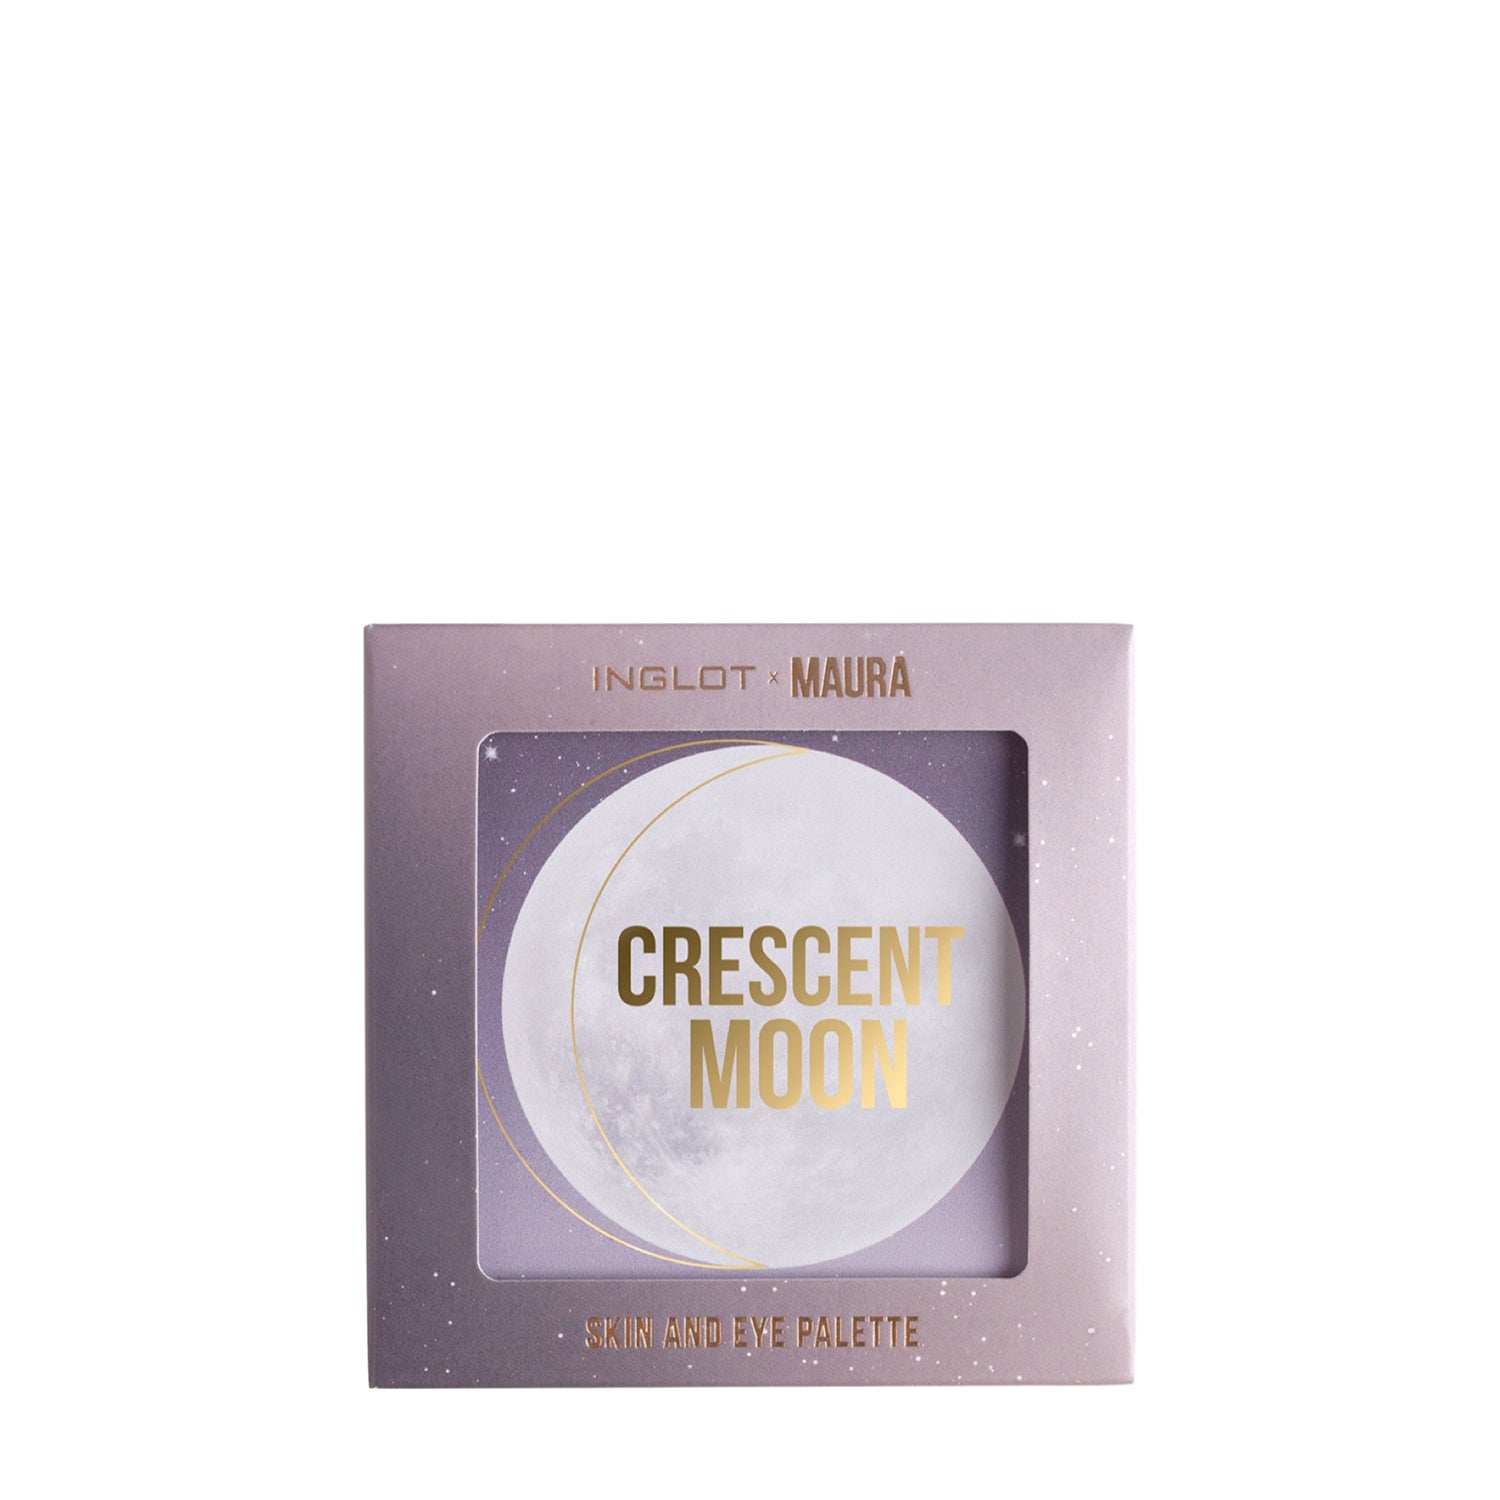 Crescent Moon Skin and Eye Palette